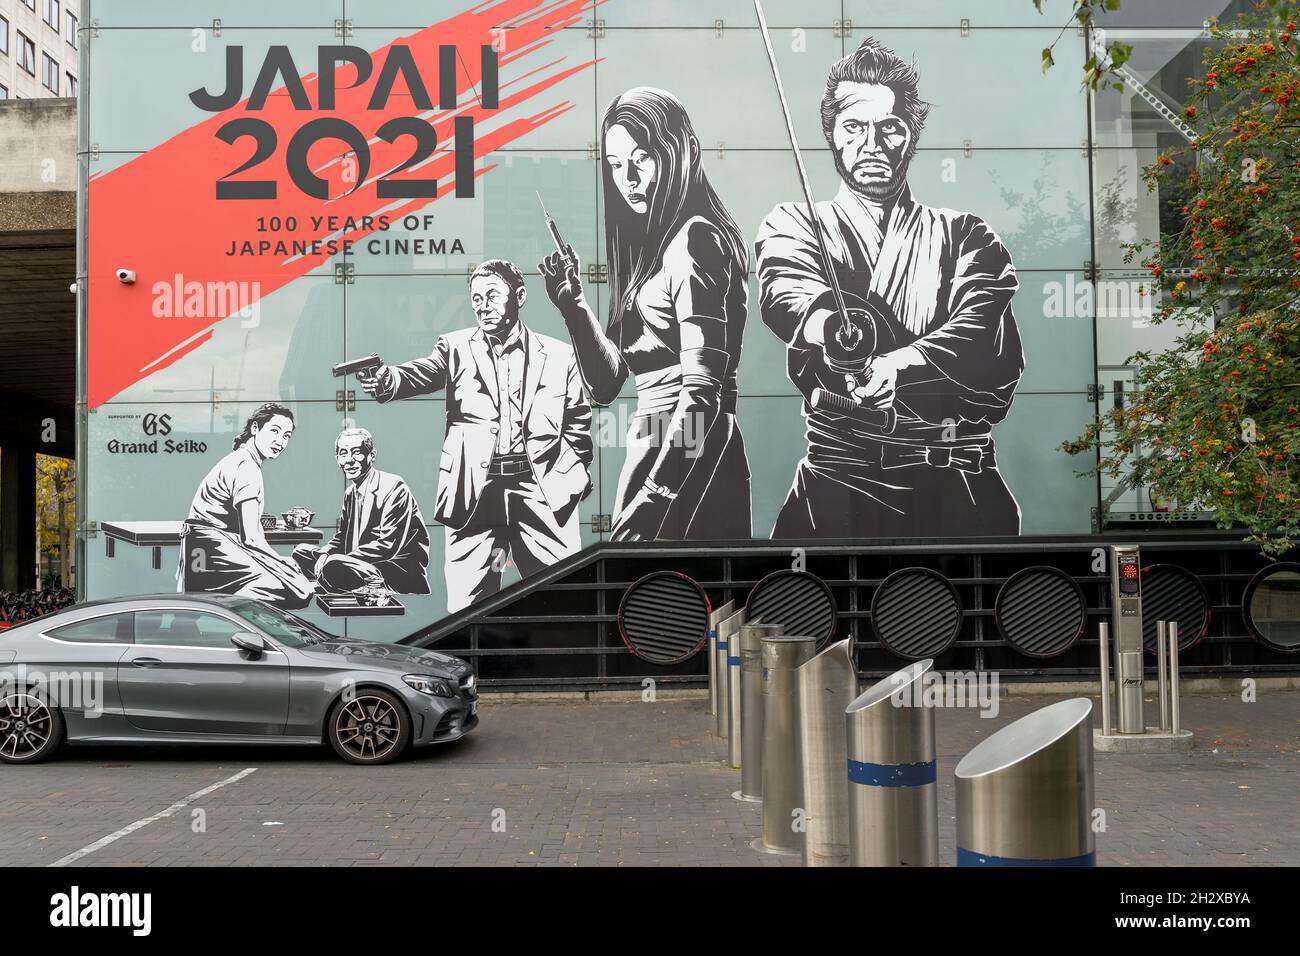 BFI Japan 2021: 100 Years of Japanese Cinema advertising at the BFI Southbank. London - 24th October 2021 Stock Photo